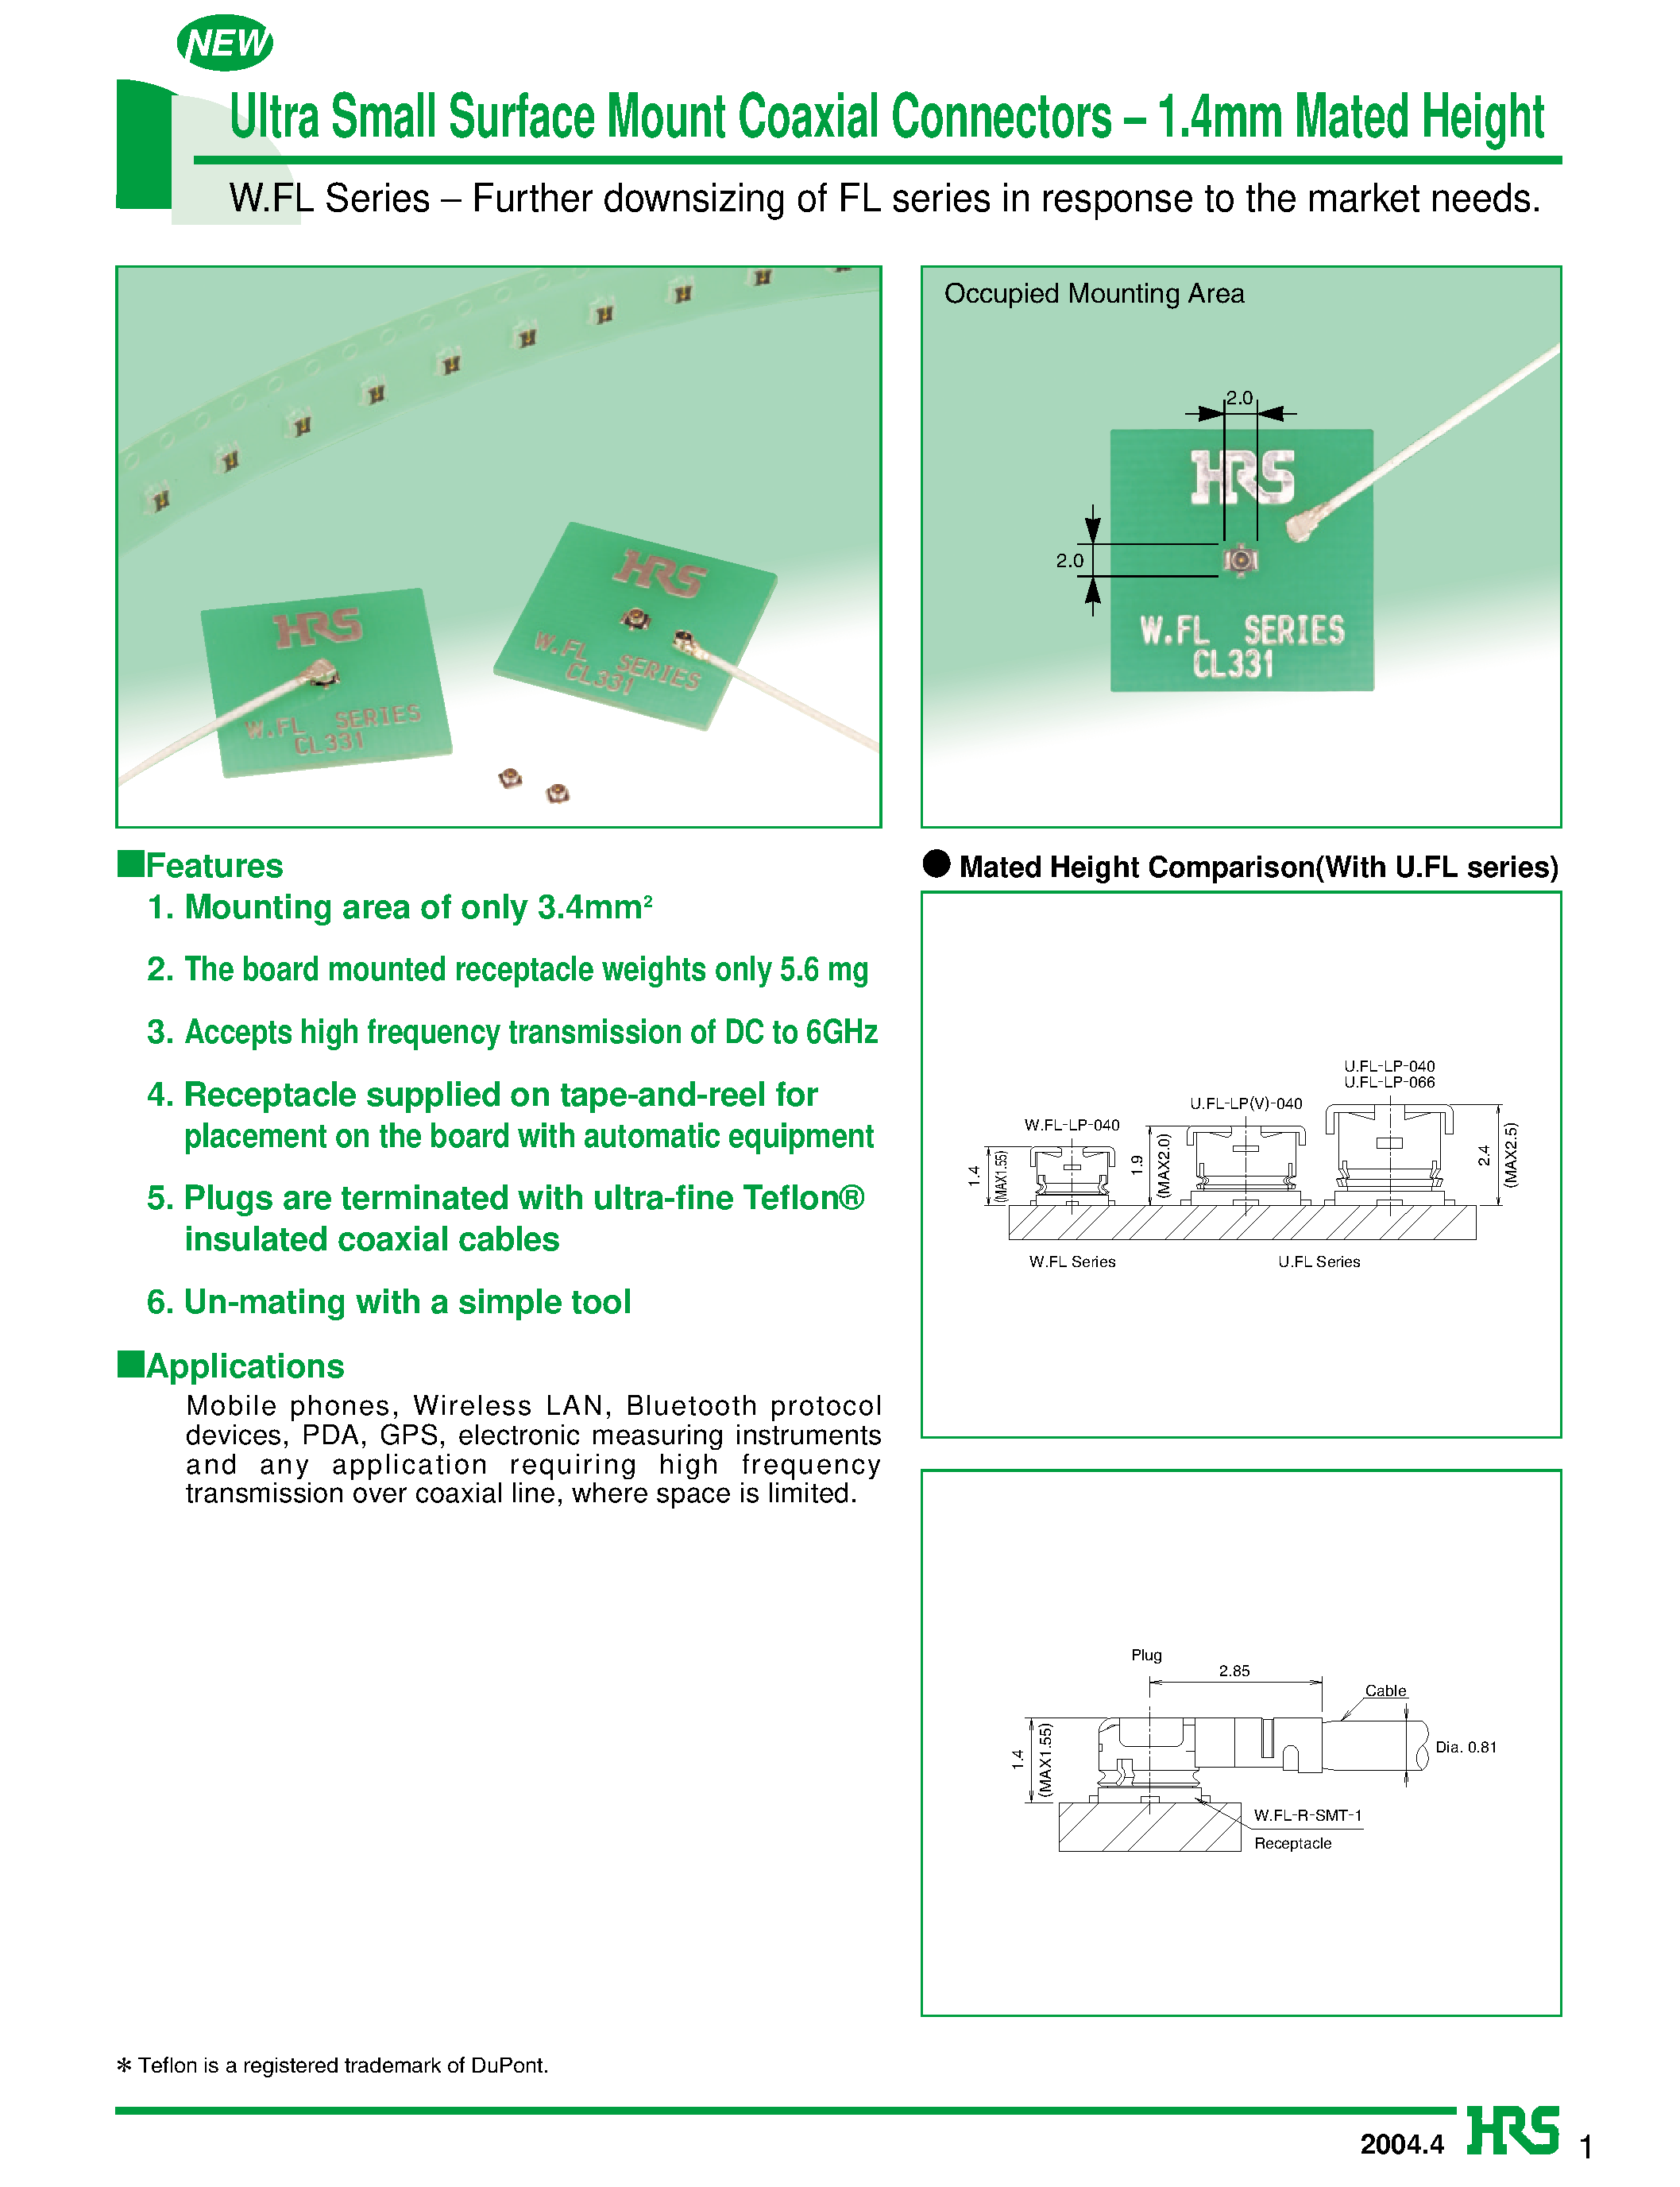 Datasheet W.FL-2LP-04N1-A - Ultra Small Surface Mount Coaxial Connectors - 1.4mm Mated Height page 1